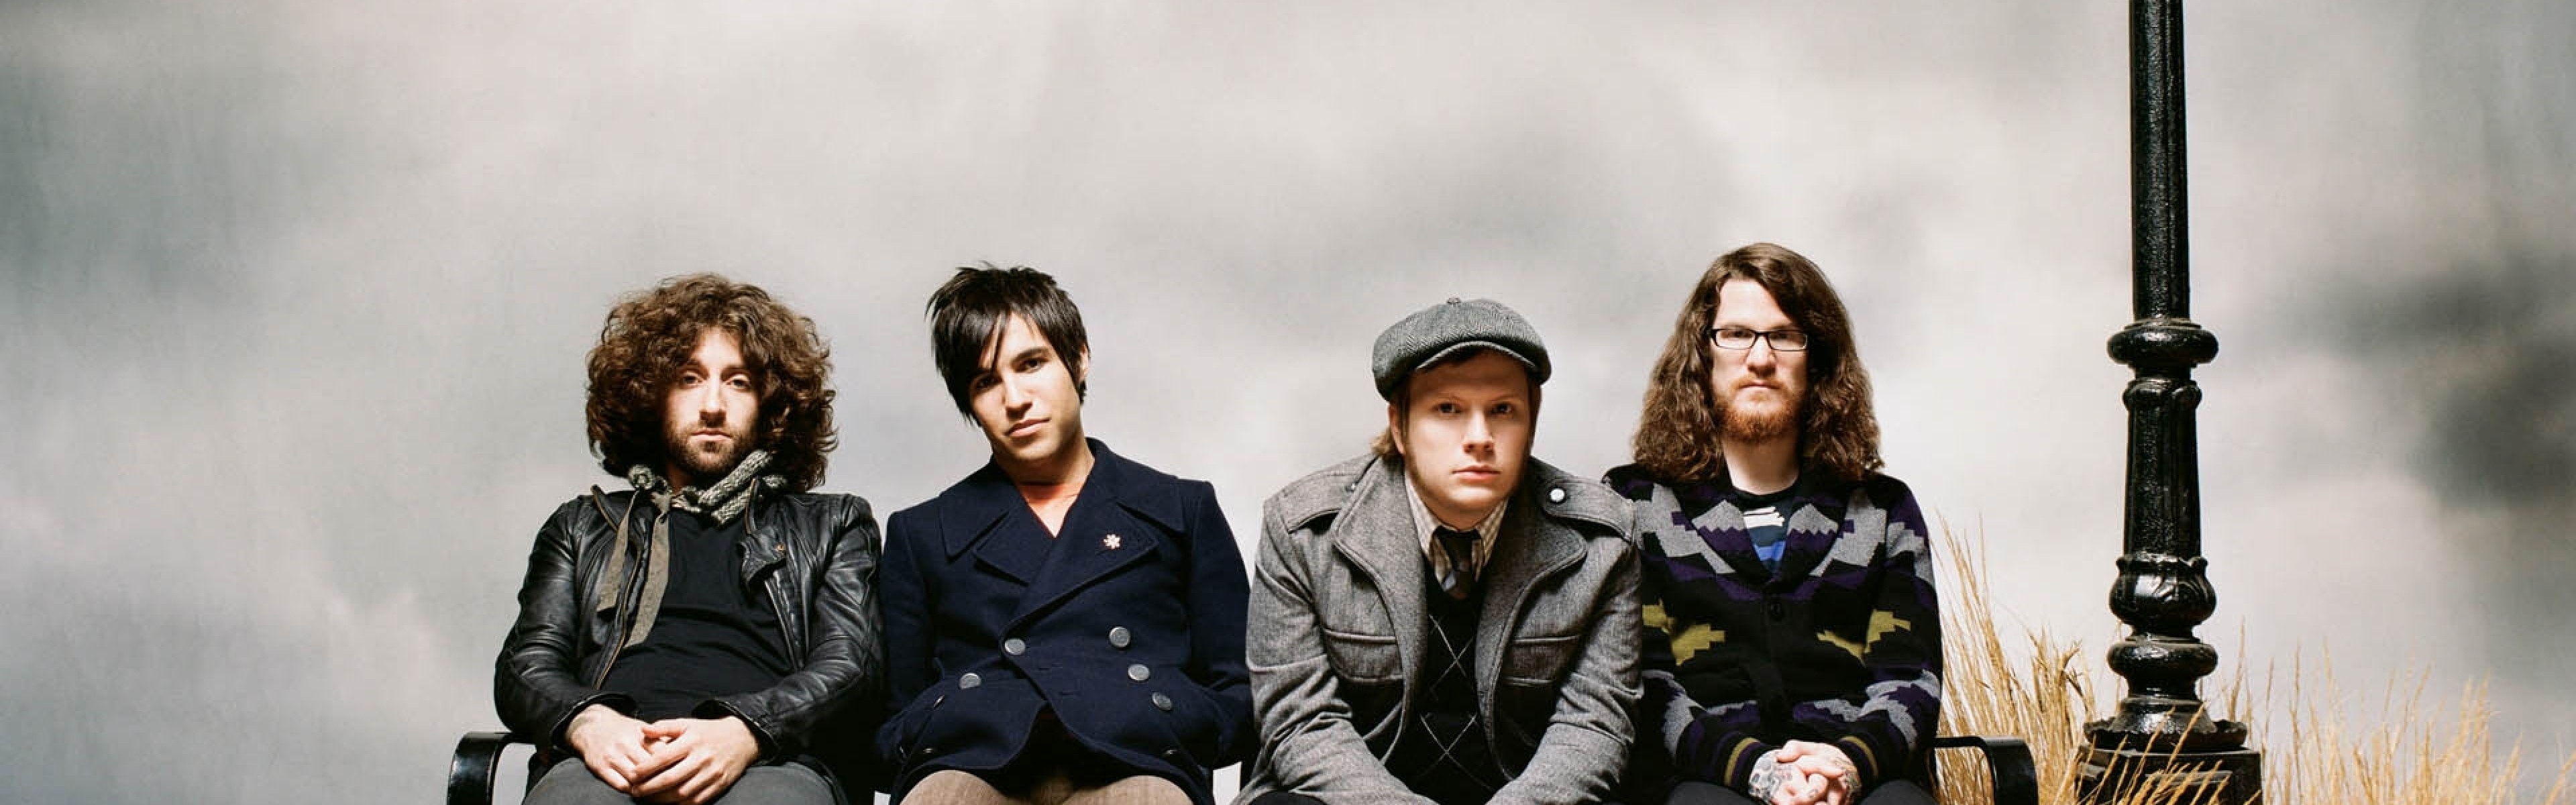 Fall Out Boy Wallpaper (74+ images)